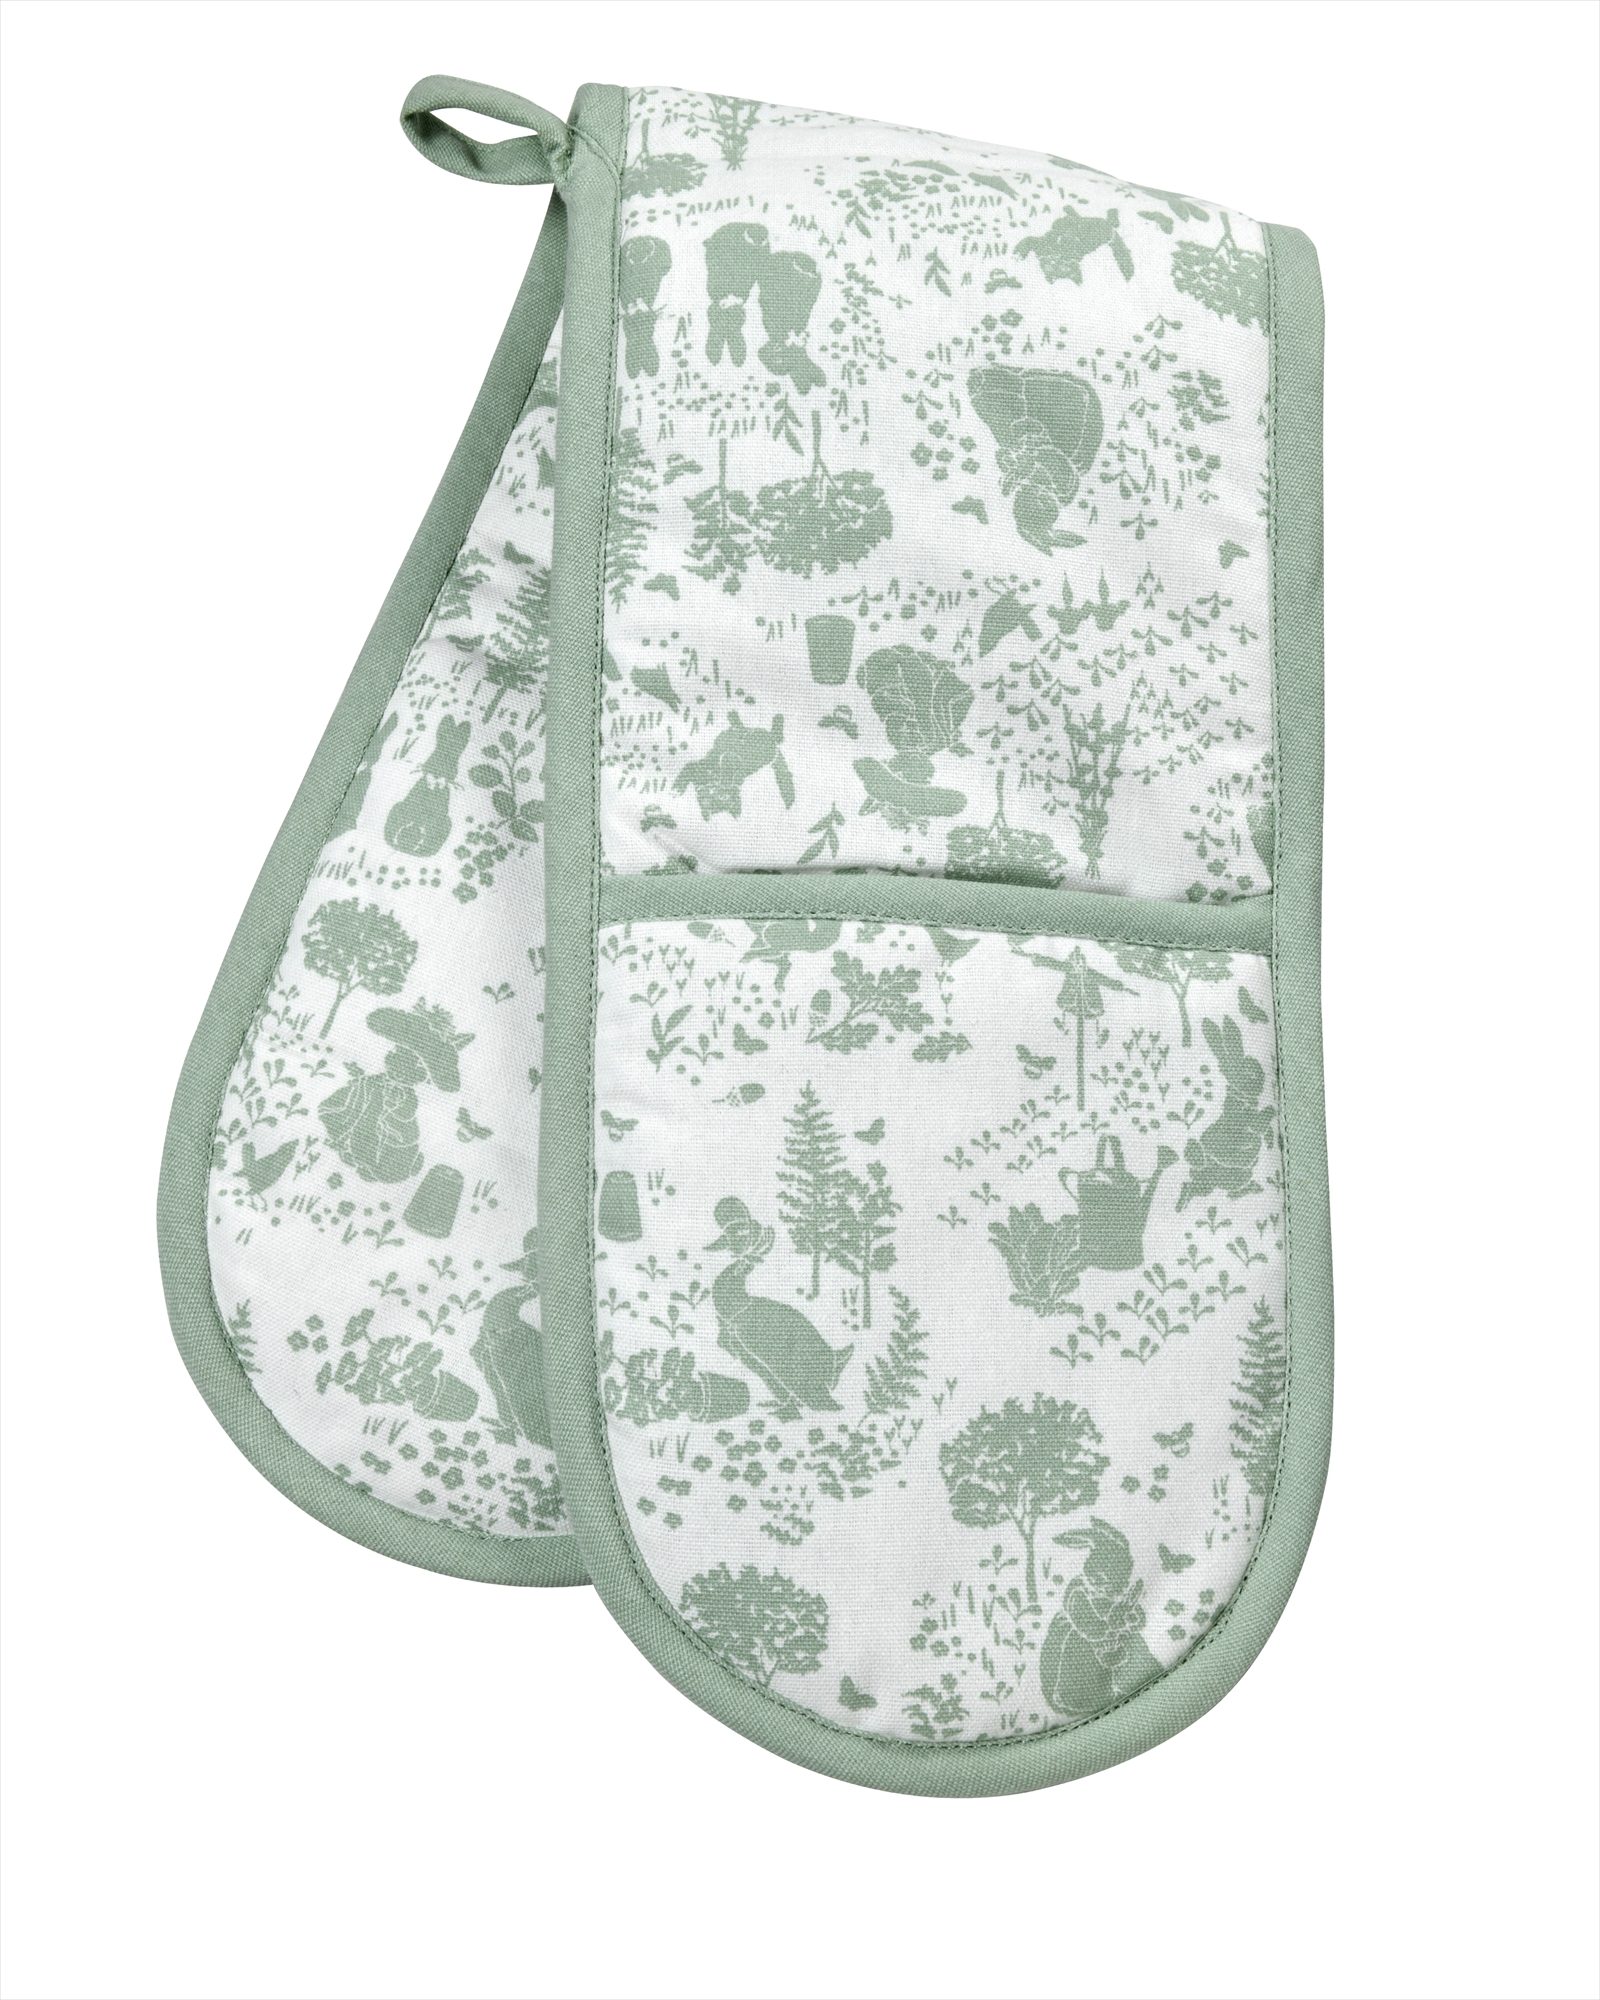 PETER RABBIT CLASSIC GREEN PATTER  DOUBLE OVEN GLOVE